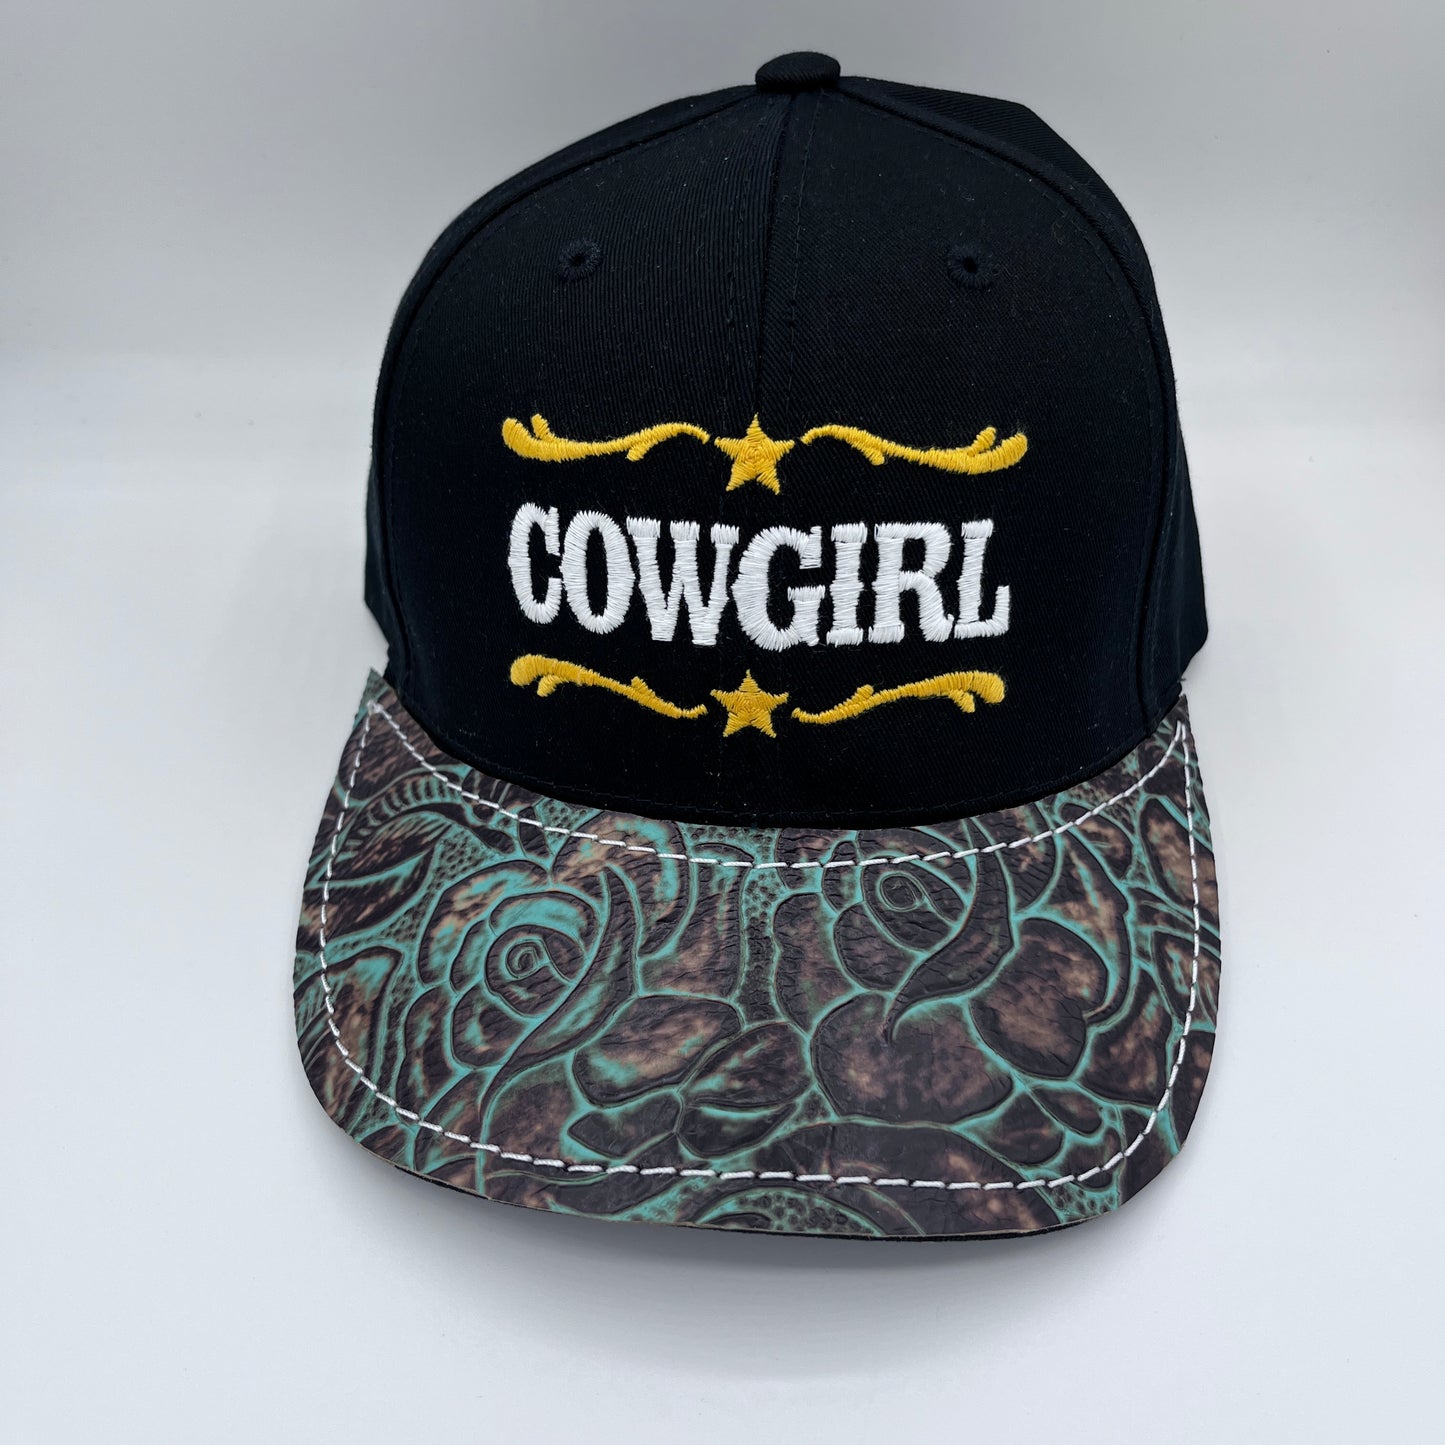 "COWGIRL" BALLCAP with SIERRA EMBOSSED LEATHER